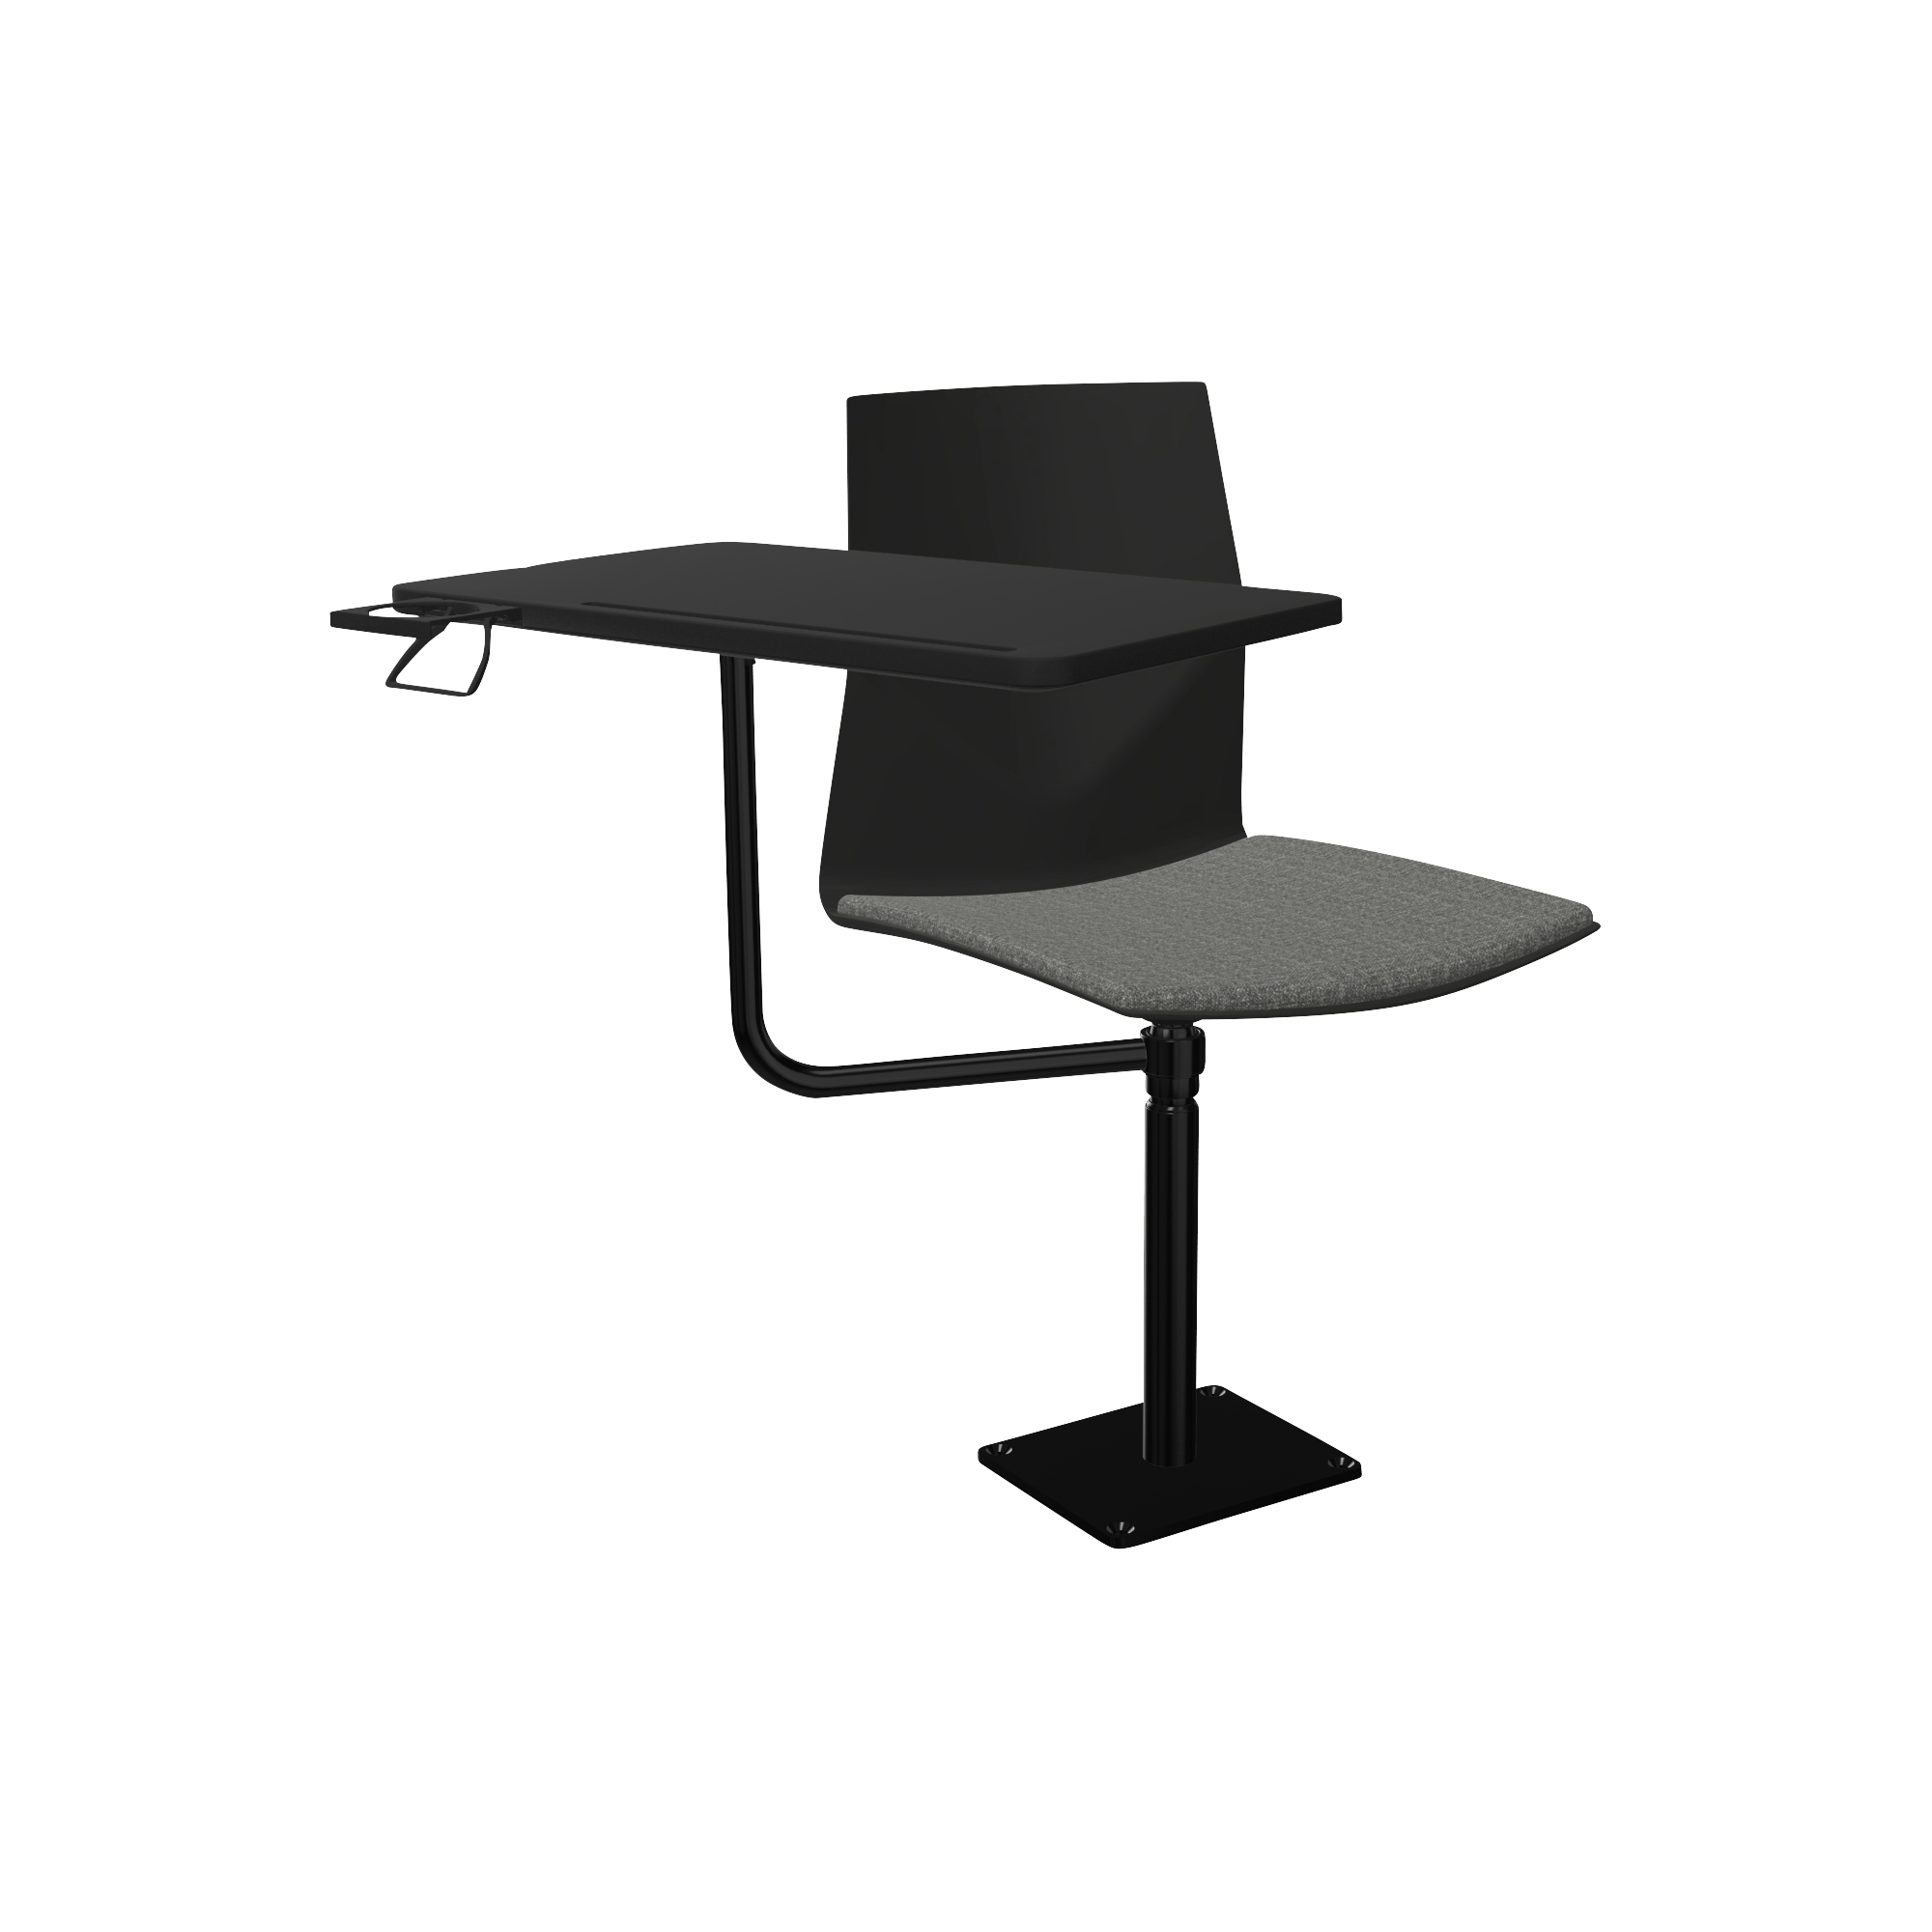 A black chair with a desk on it.